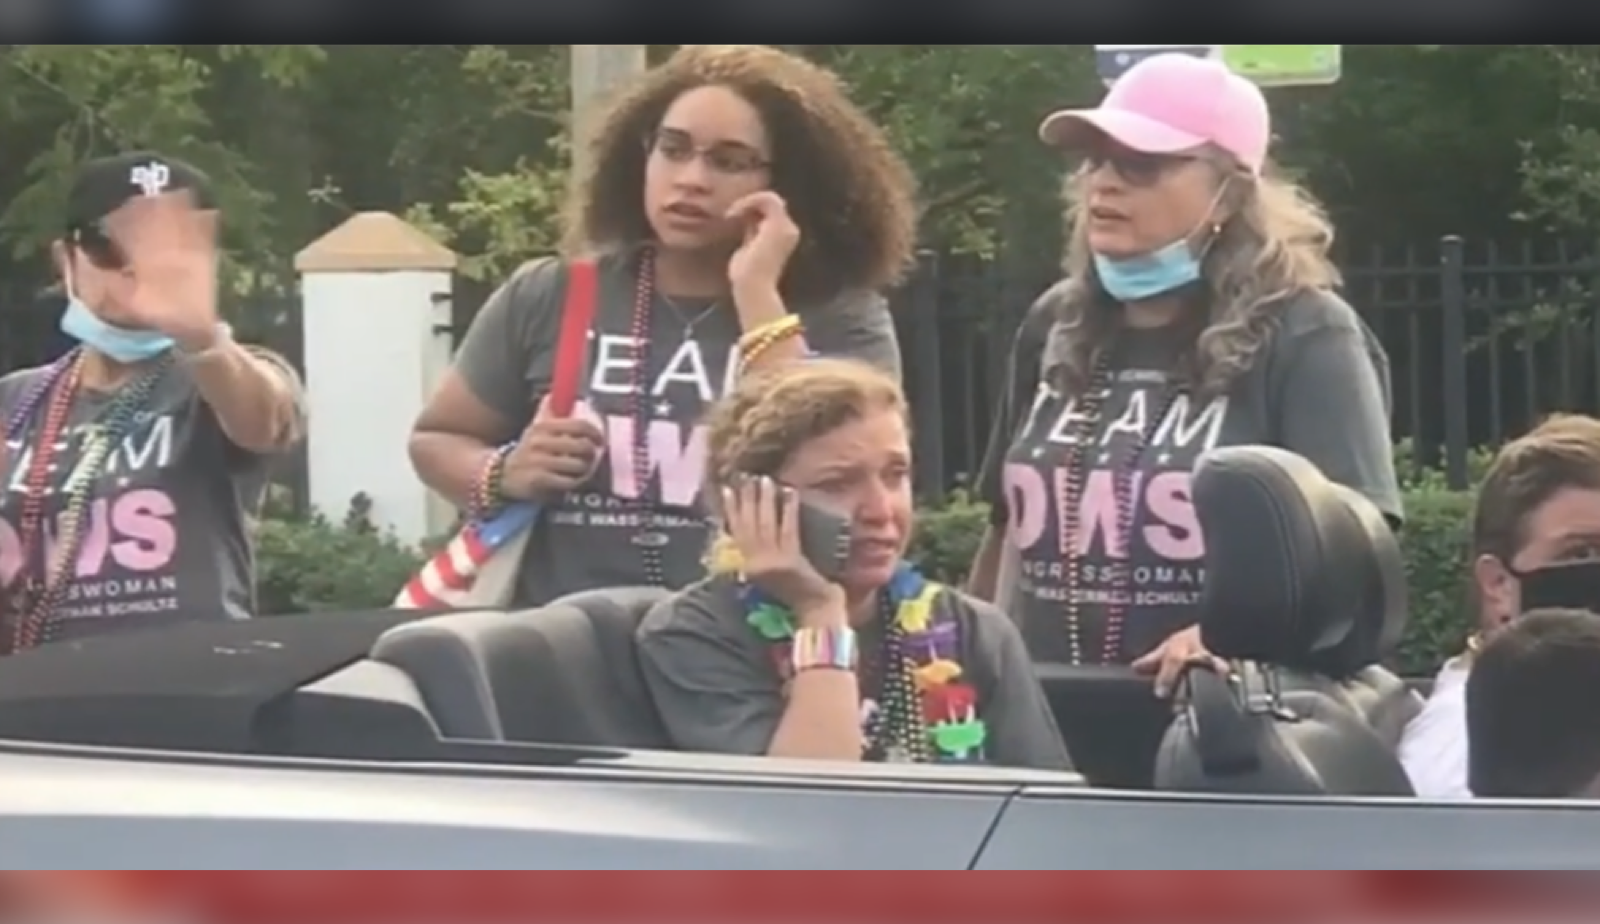 Rep. Debbie Wasserman Schultz (D-FL) on the phone after the incident at the Pride celebration.